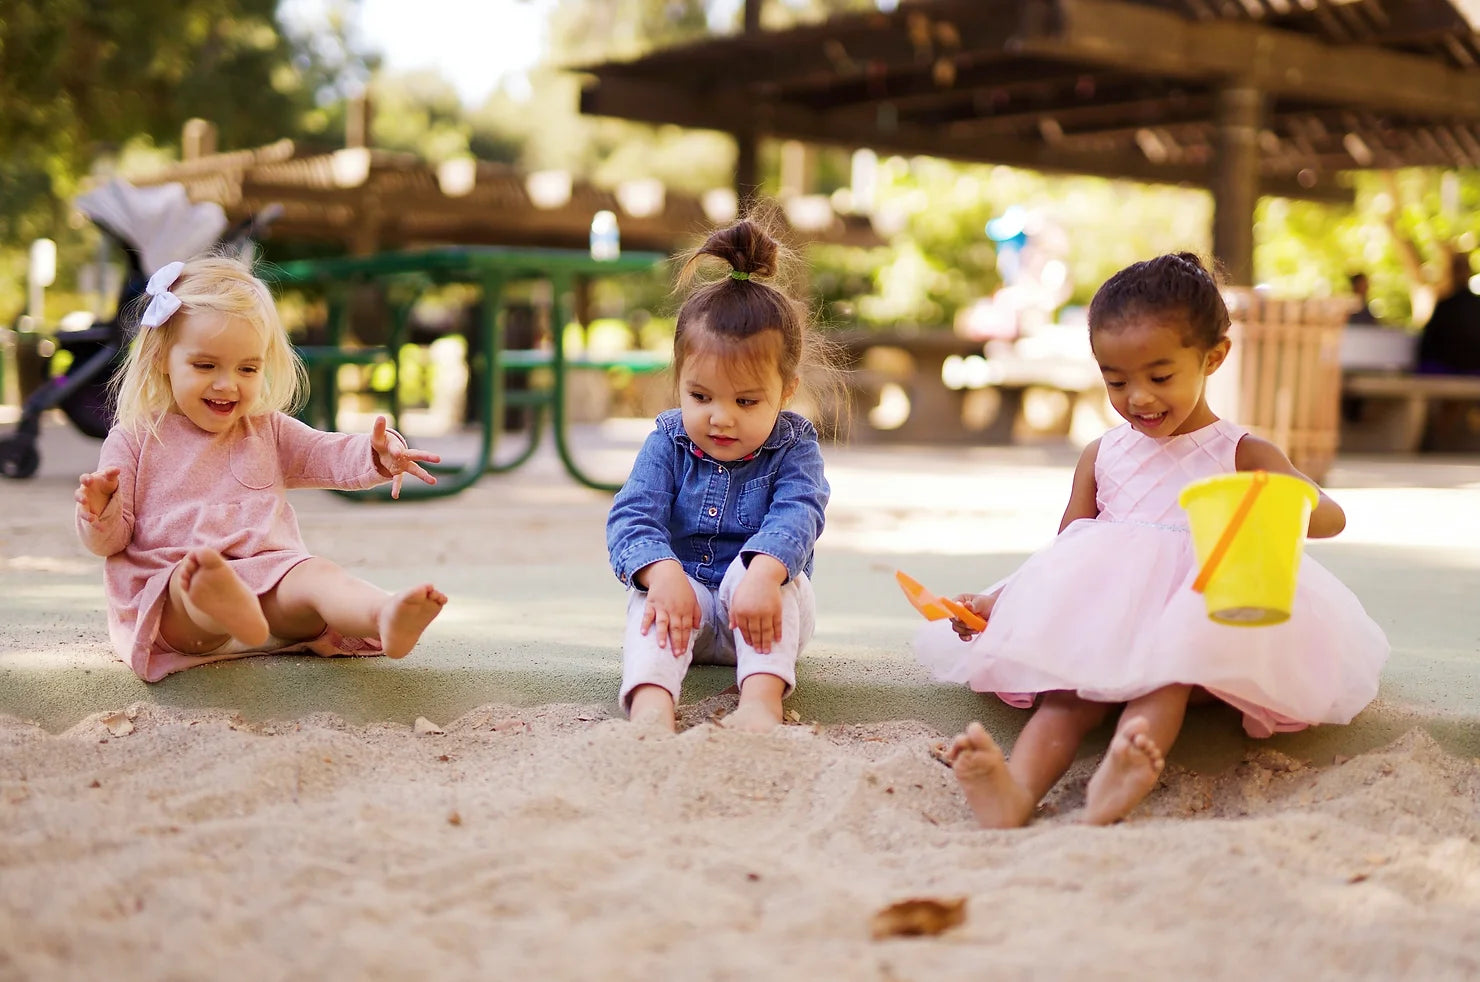 
  
  Supporting Child Development through Play
  
